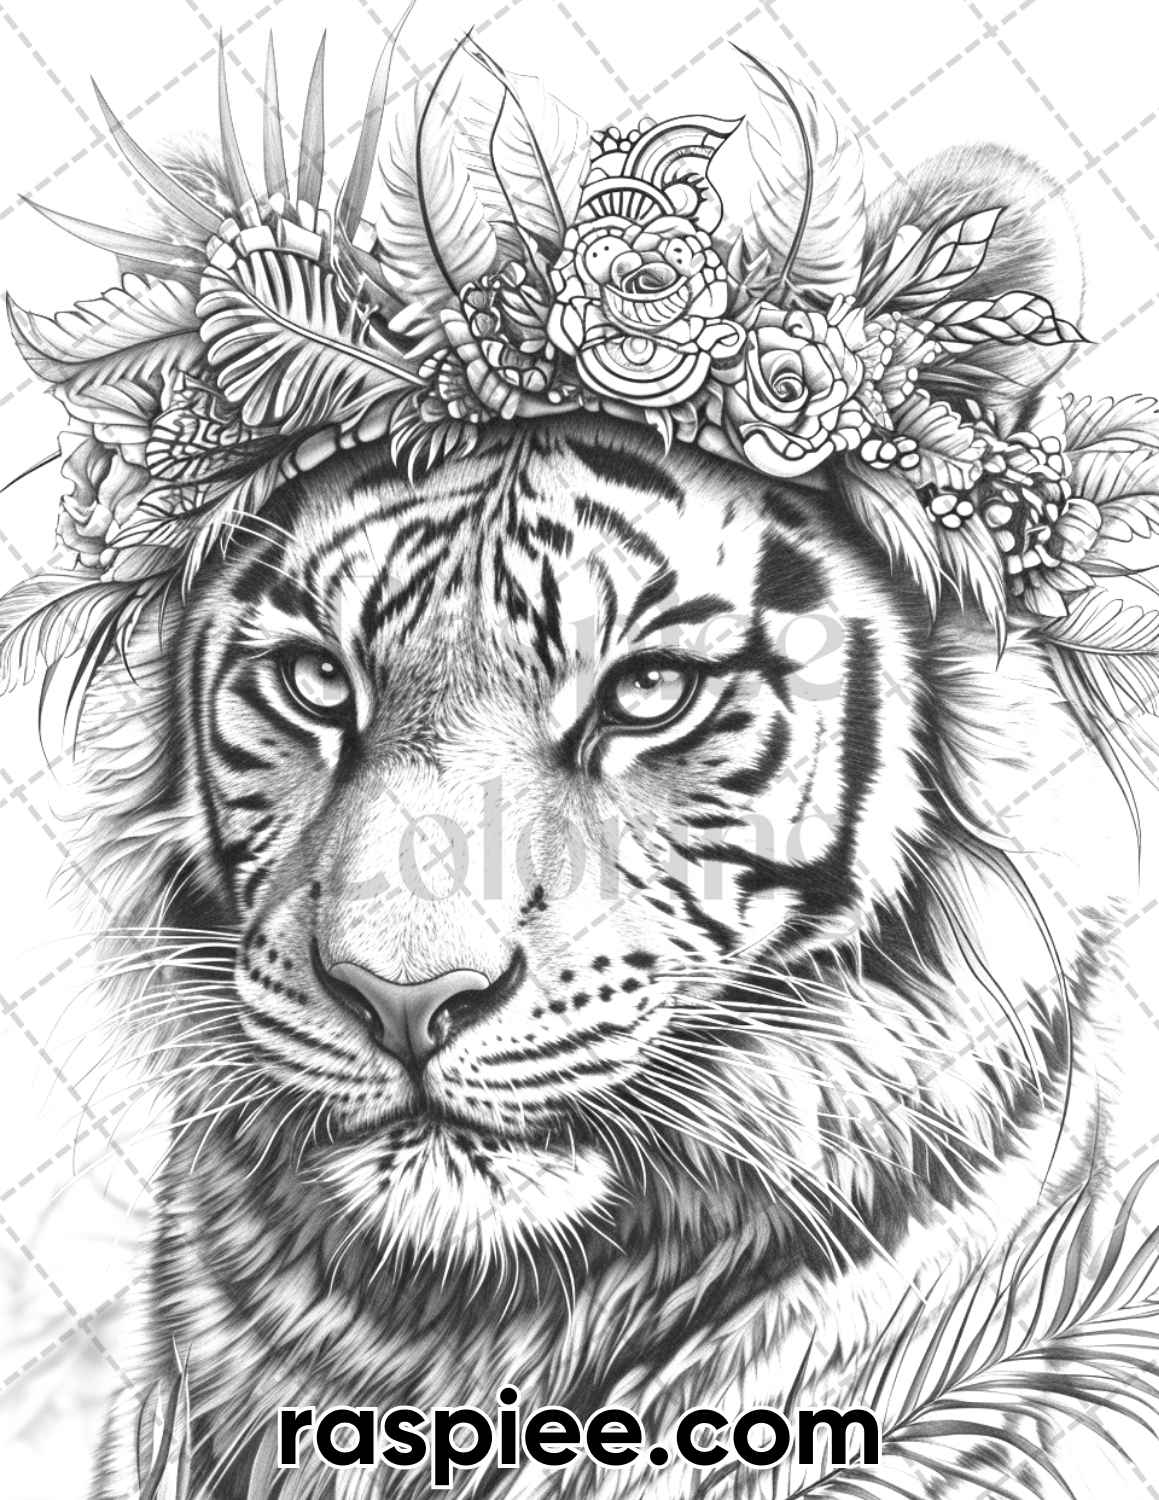 adult coloring pages, adult coloring sheets, adult coloring book pdf, adult coloring book printable, grayscale coloring pages, grayscale coloring books, animal coloring pages for adults, animal coloring book, mardi gras animals coloring pages for adults, grayscale illustration, holiday day coloring book, holiday adult coloring pages